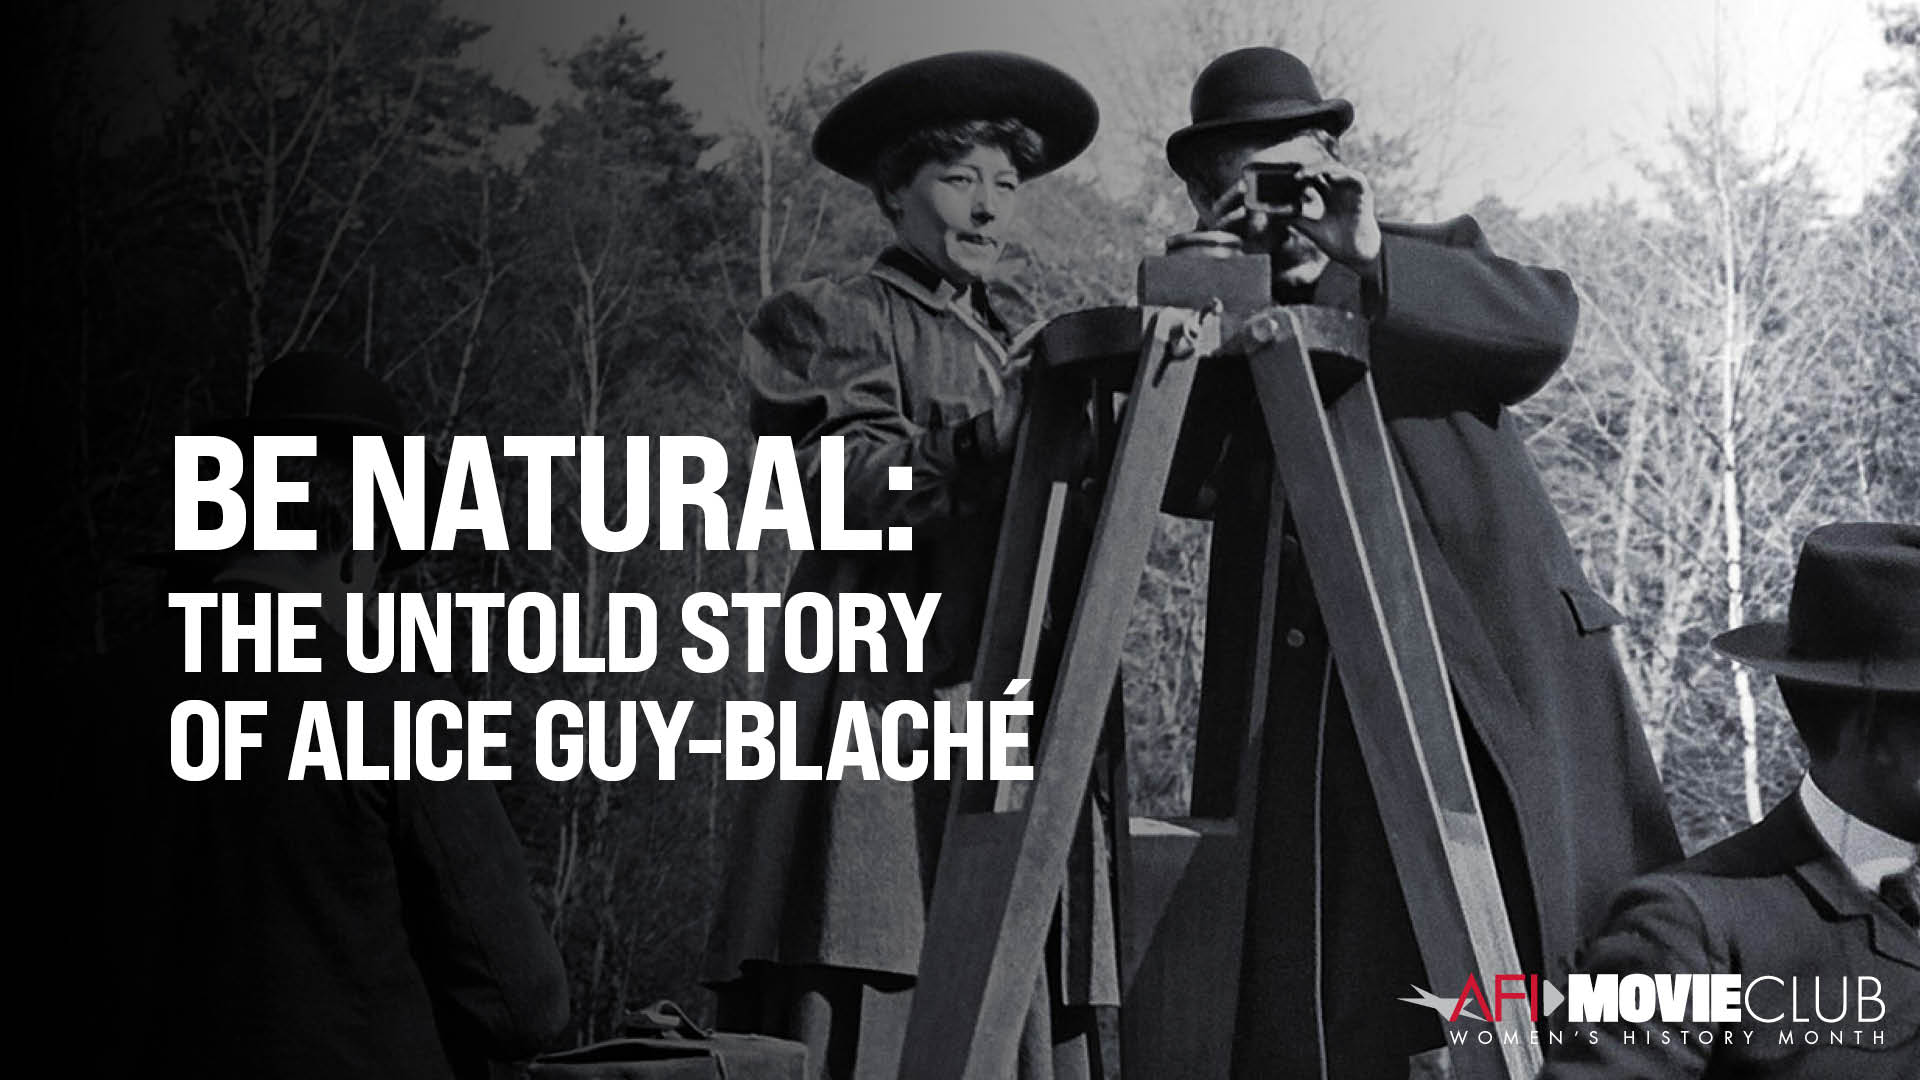 Be Natural: The Untold Story of Alice Guy-Blanche Film Still